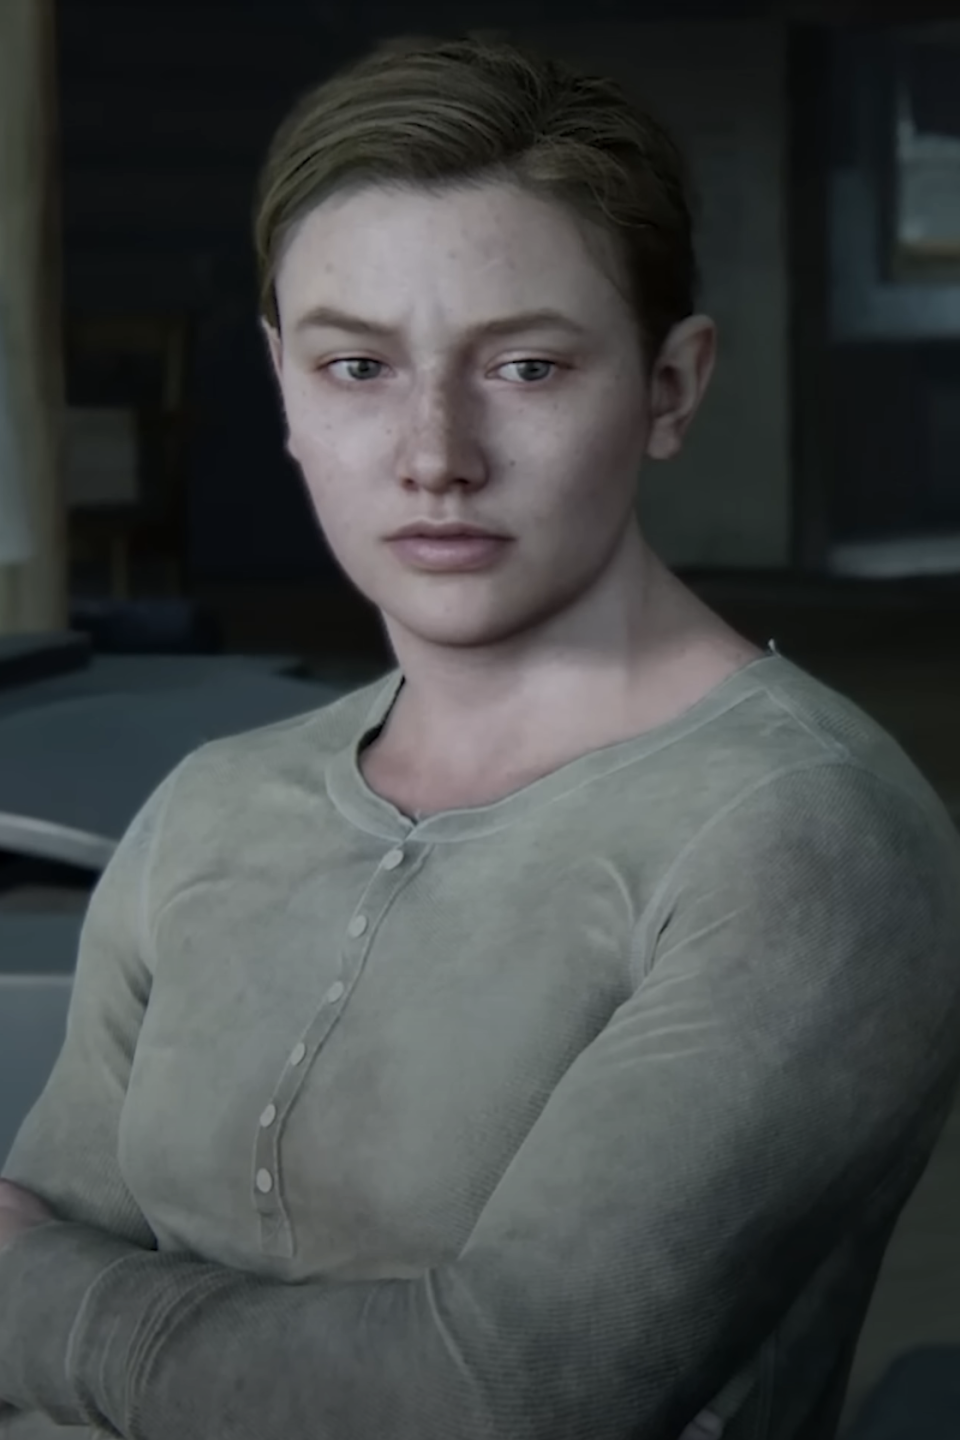 Abby from The Last of Us video game, in a serious pose, wearing a henley shirt